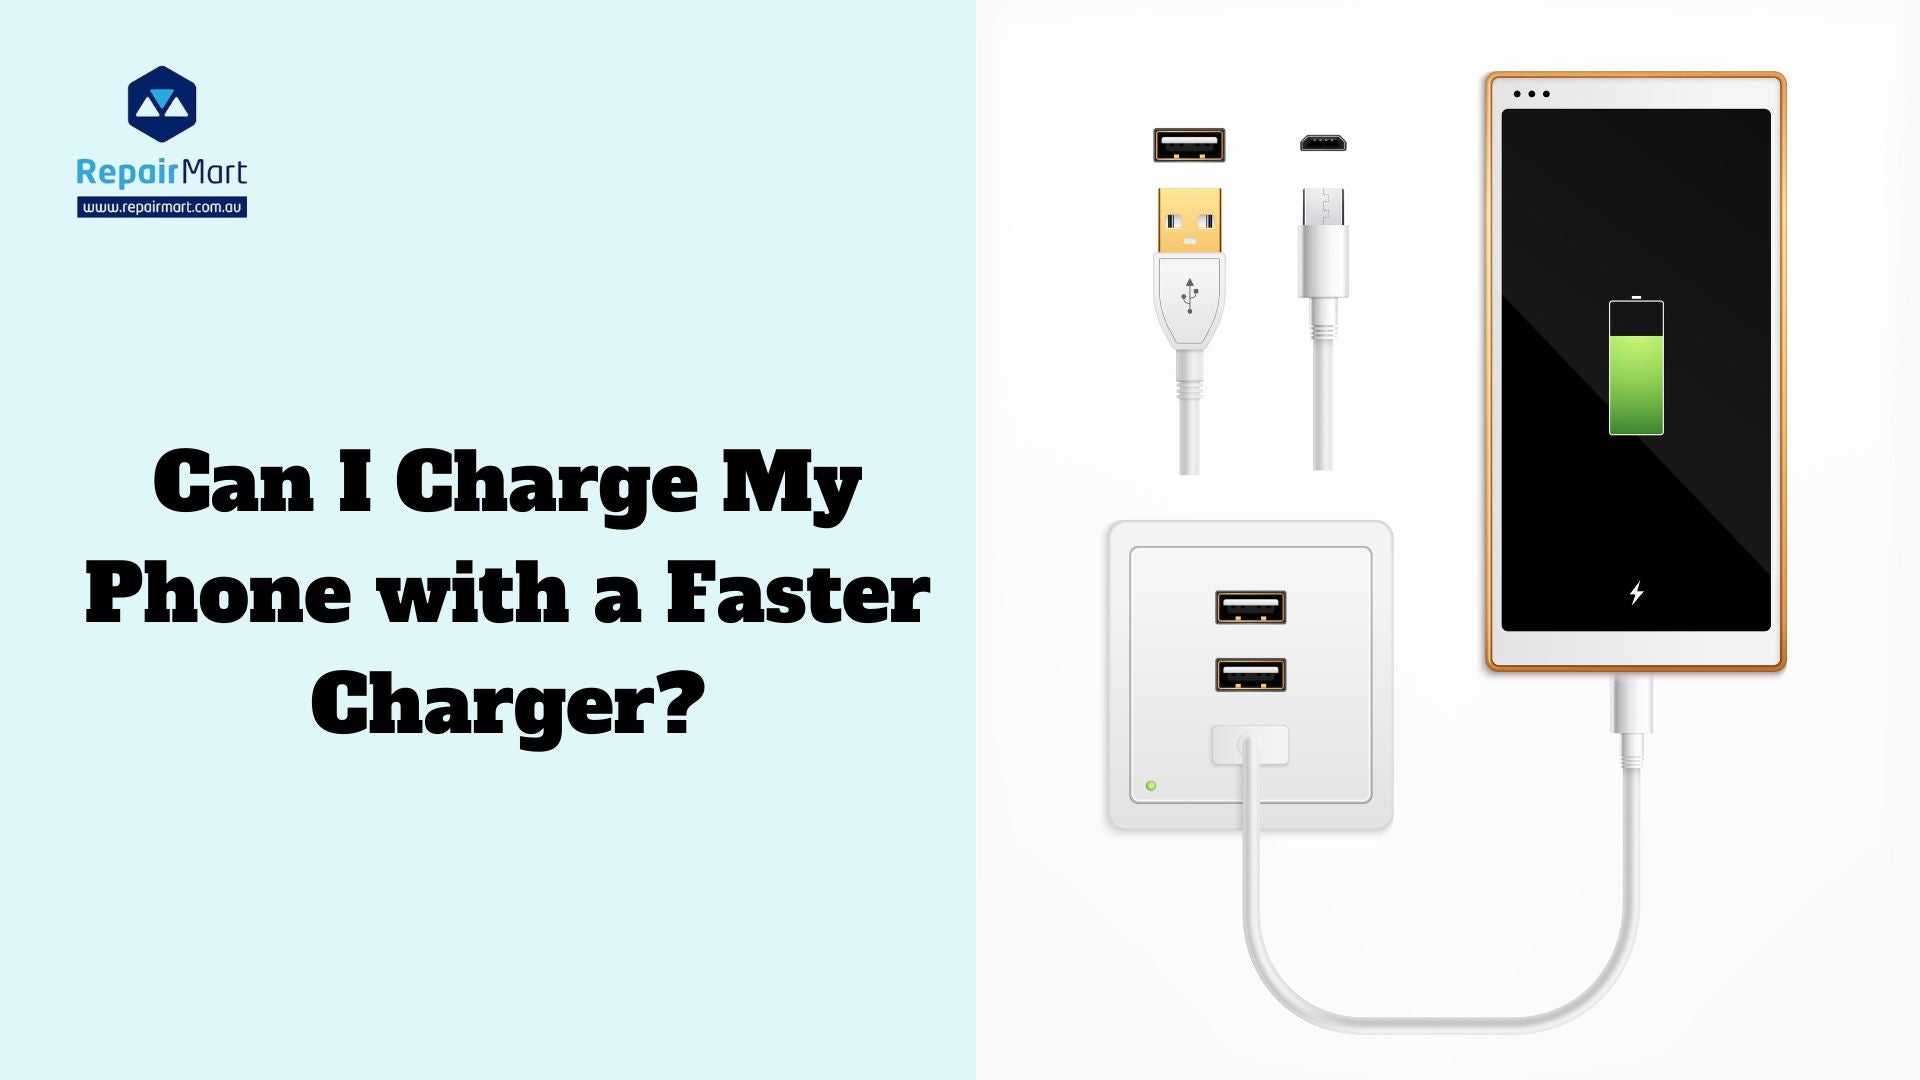 Can I Charge My Phone with a Faster Charger?